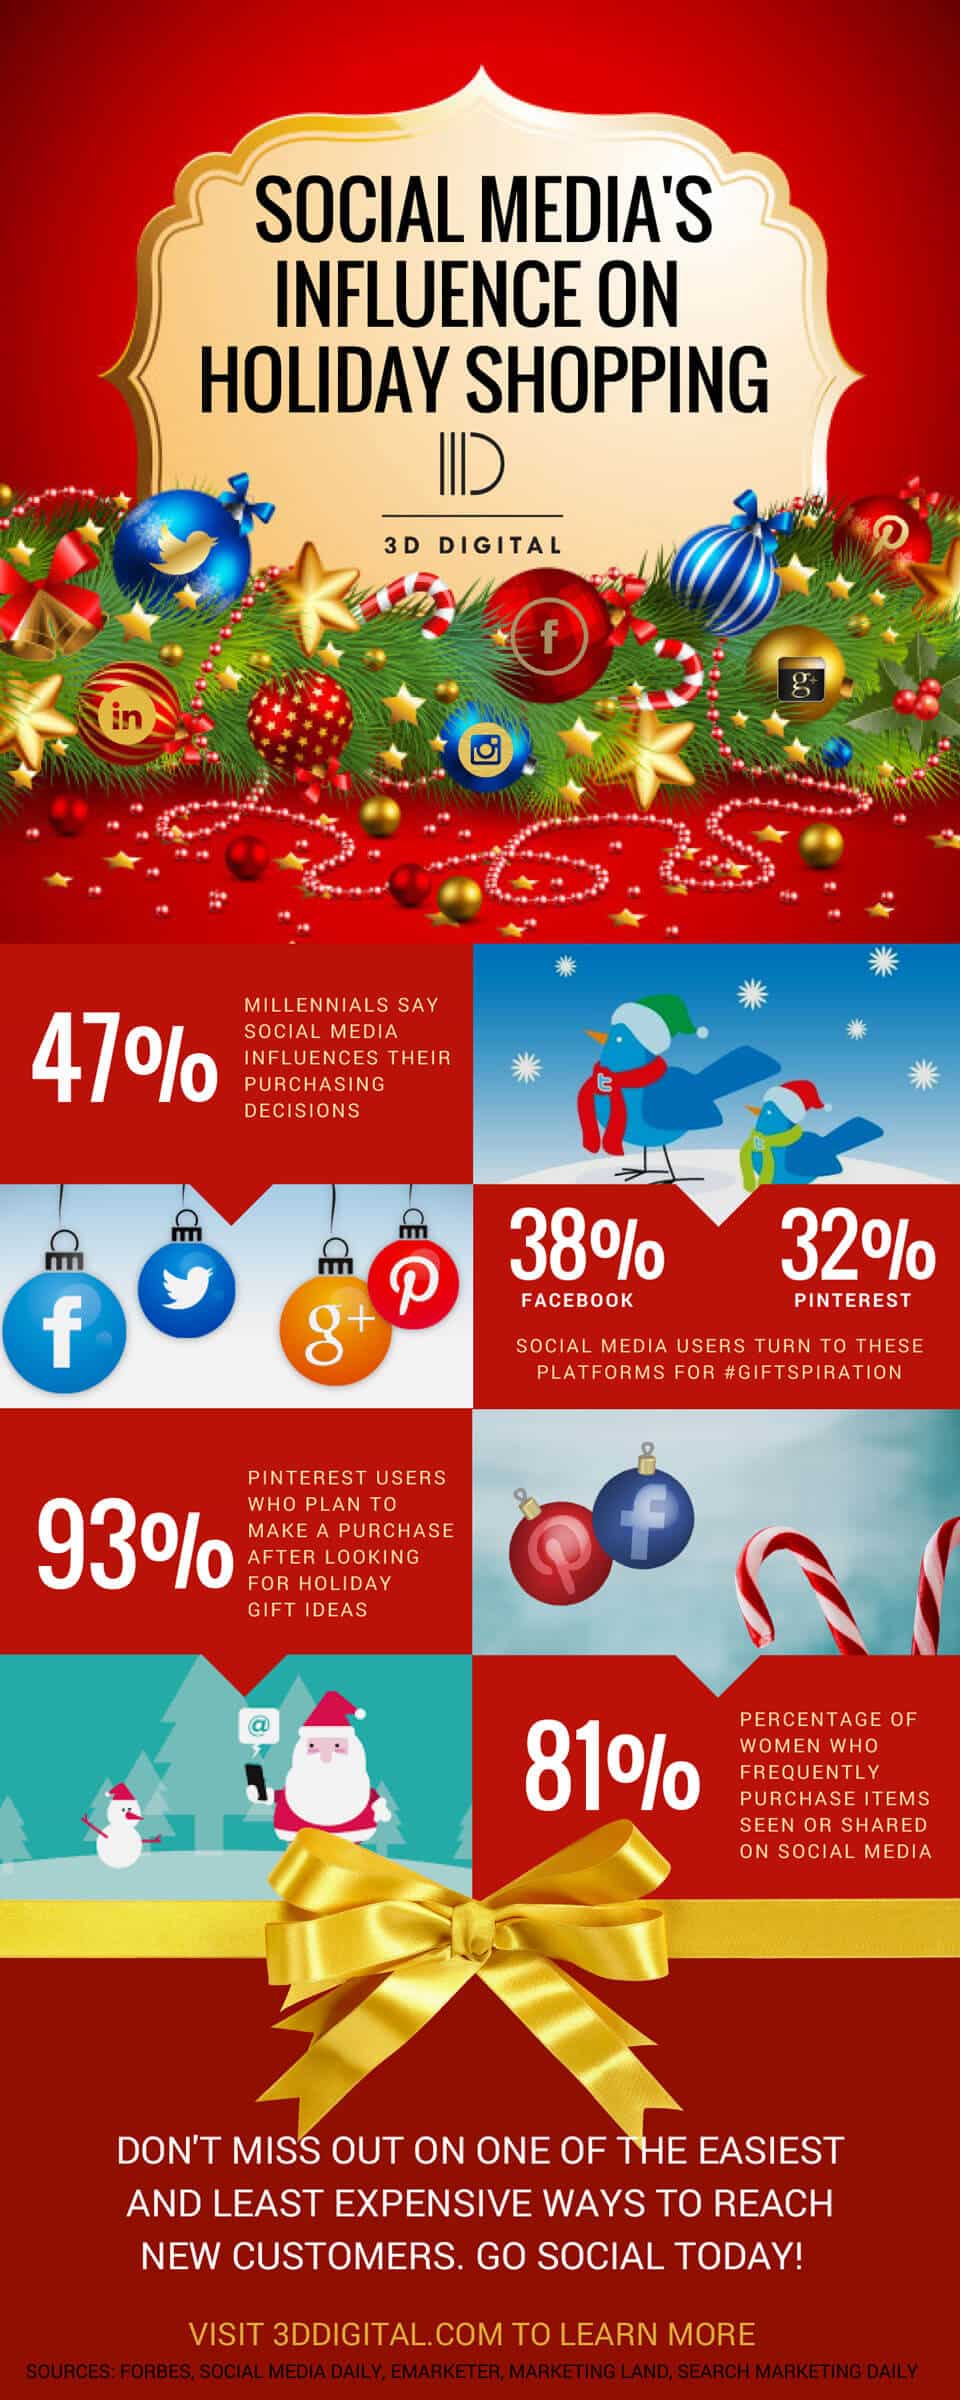 social media's influence on holiday shopping 